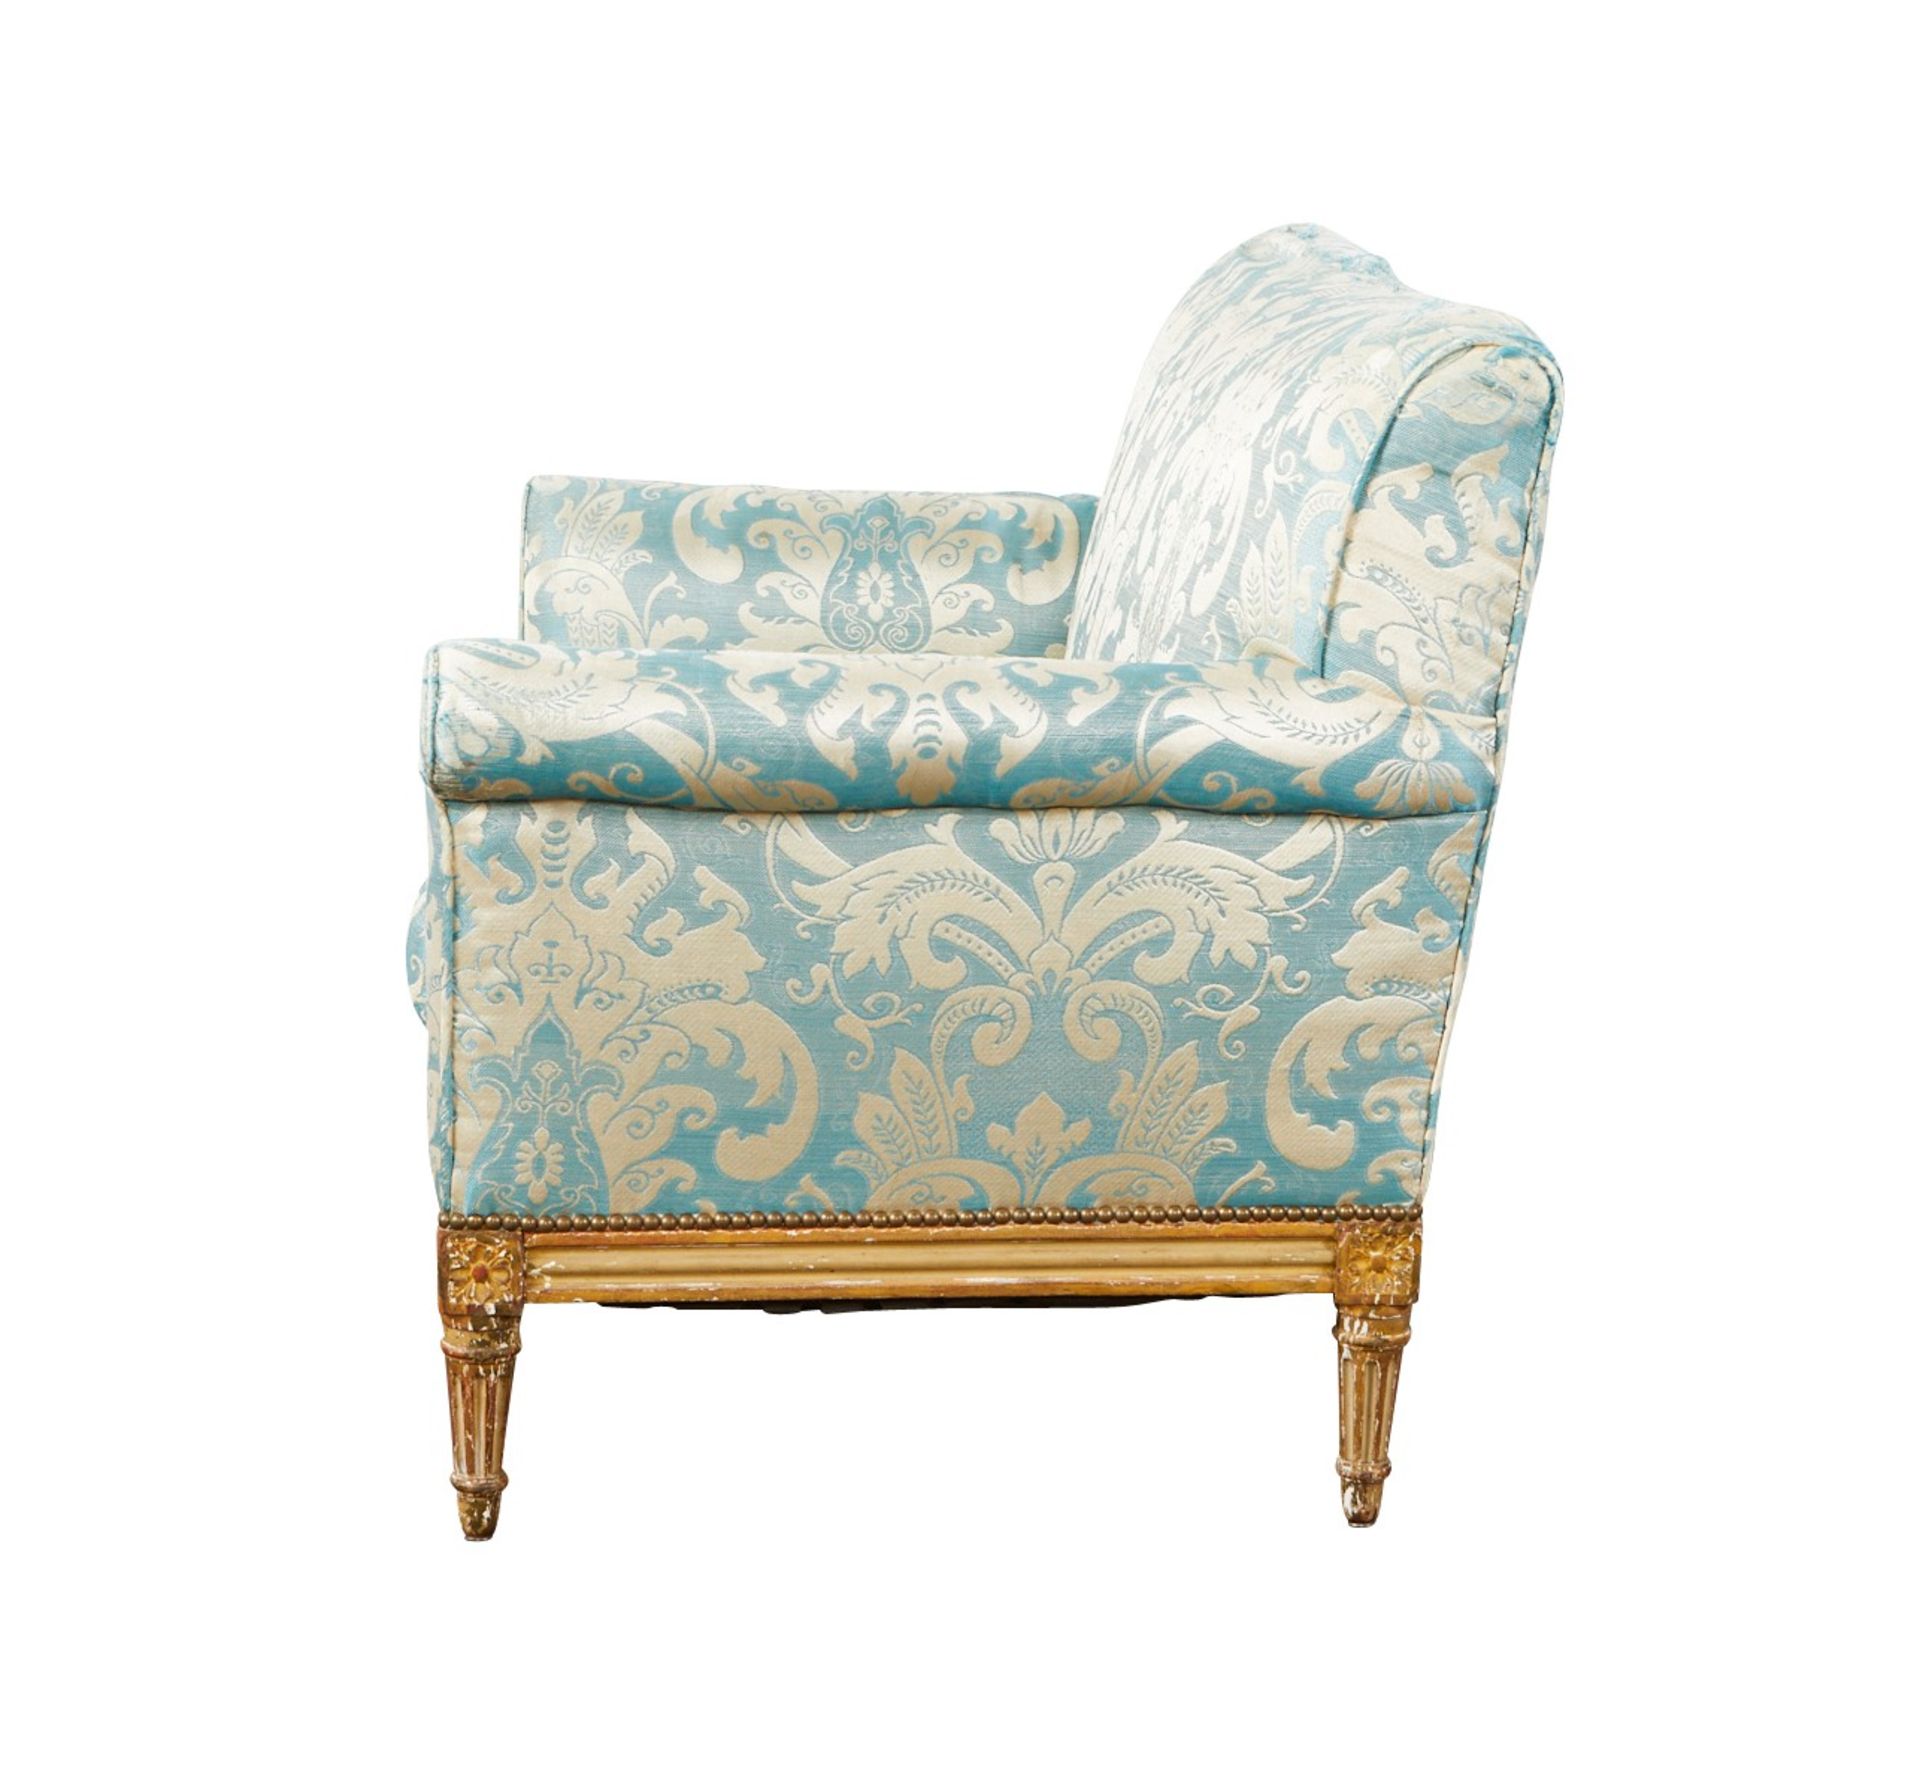 French Upholstered Giltwood Loveseat or Settee - Image 5 of 13